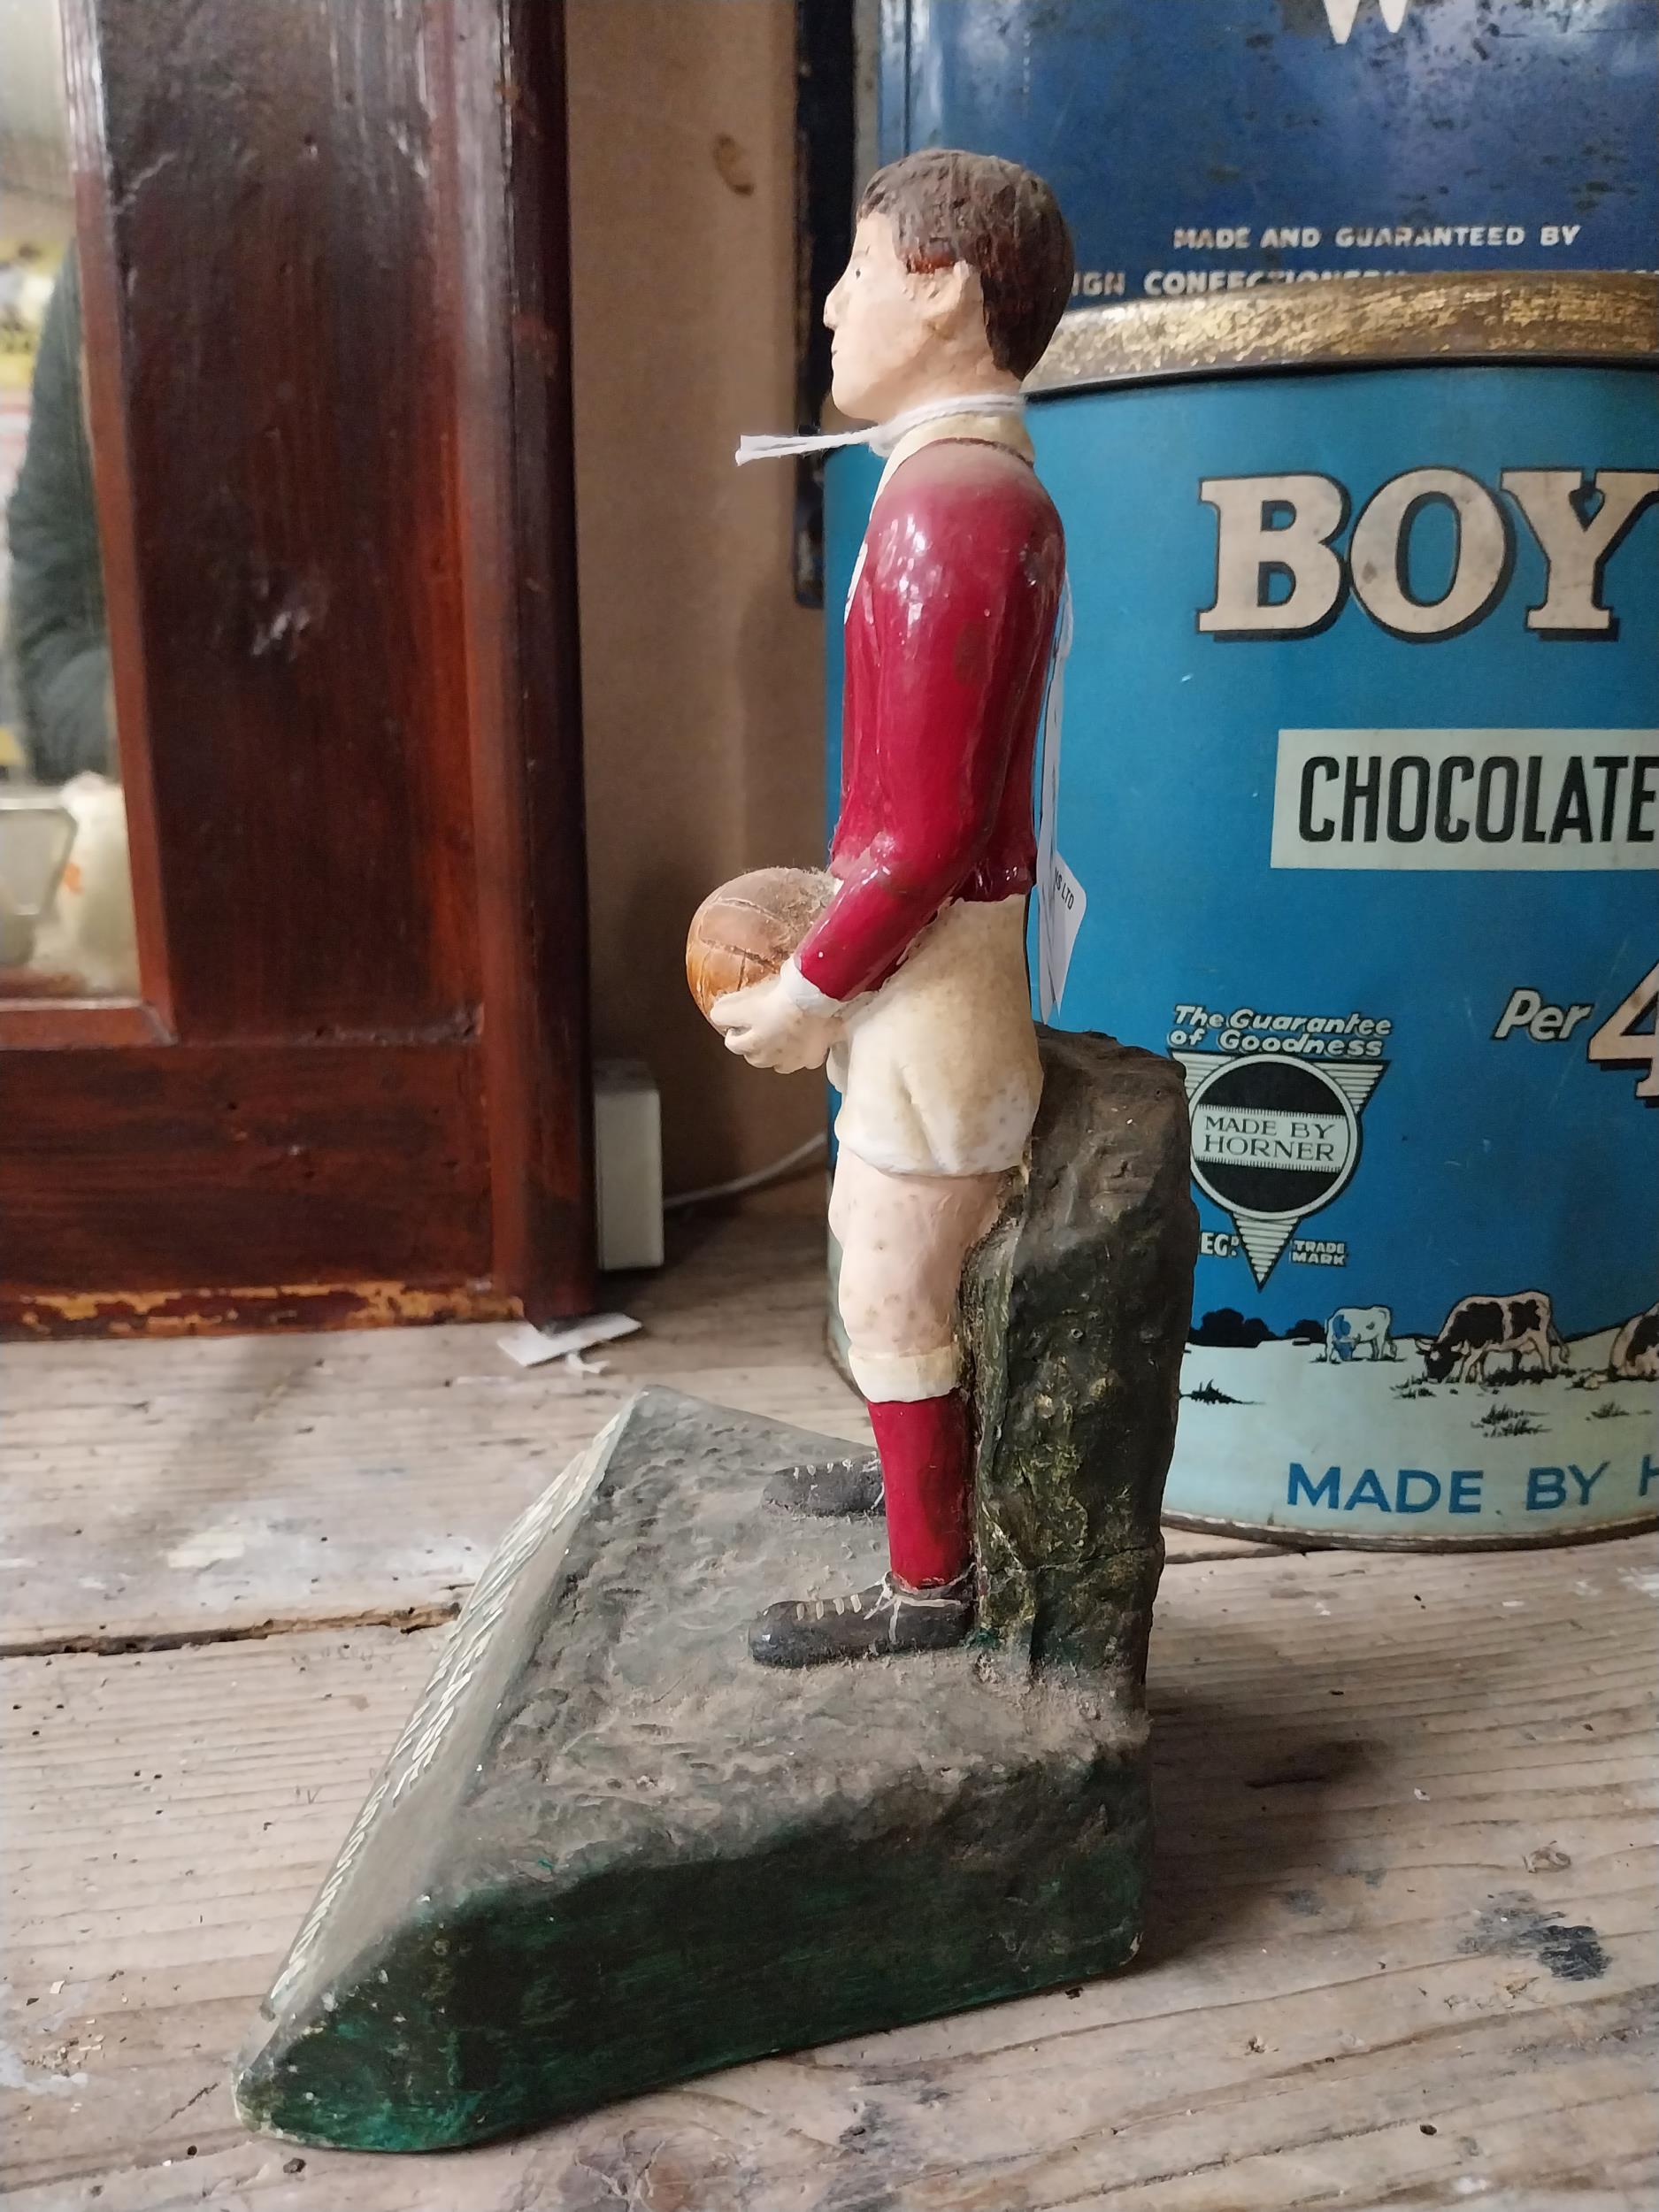 Player's Please No 6 Galway GAA player advertising figure. {25 cm H x 15 cm W x 11 cm D}. - Image 2 of 5